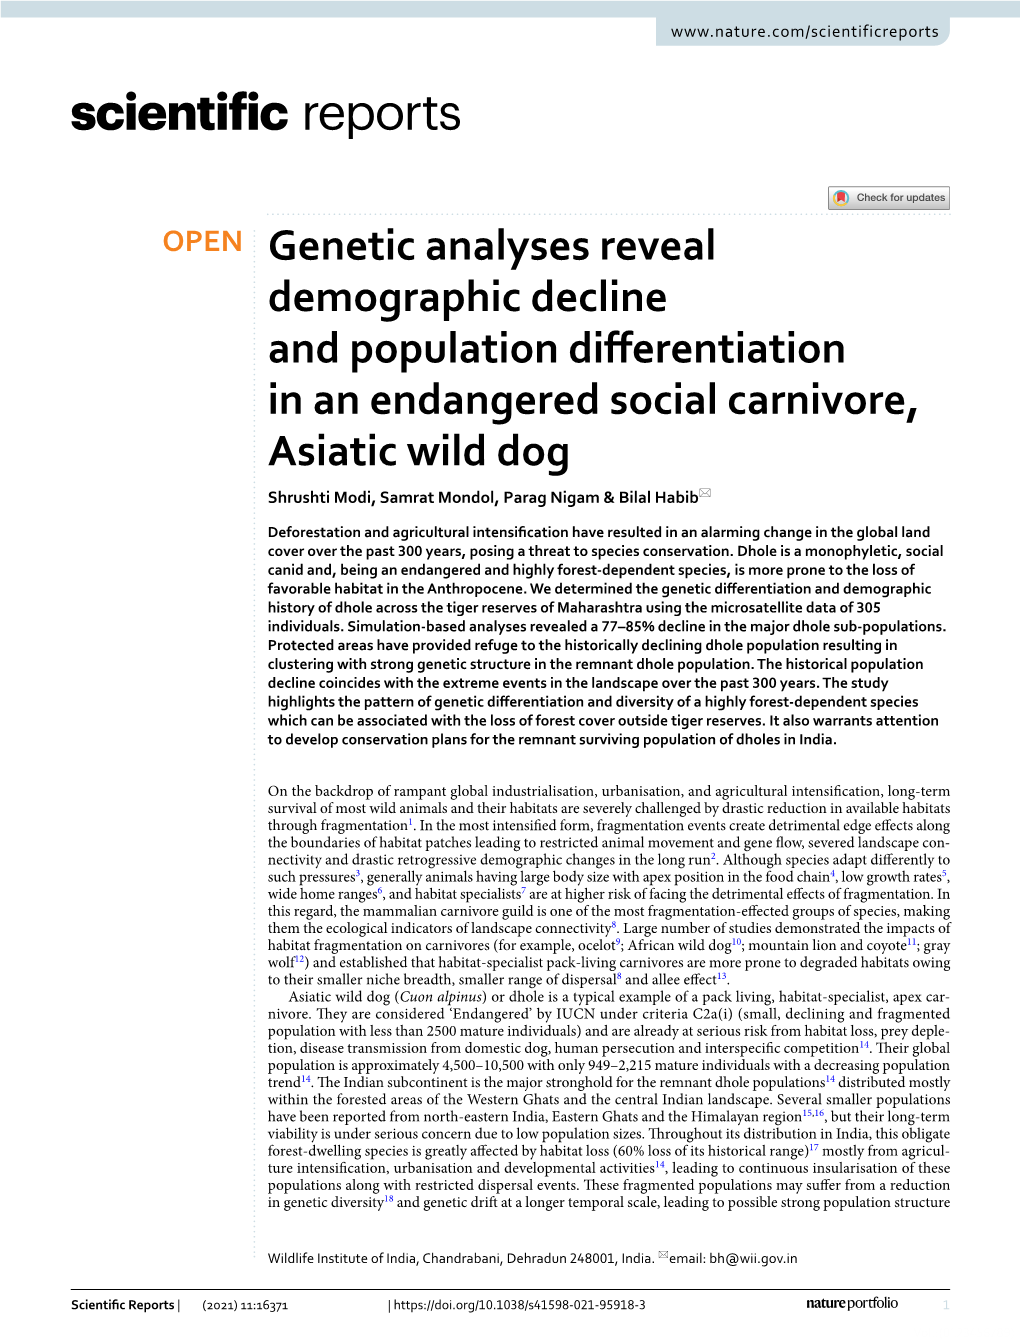 Genetic Analyses Reveal Demographic Decline and Population